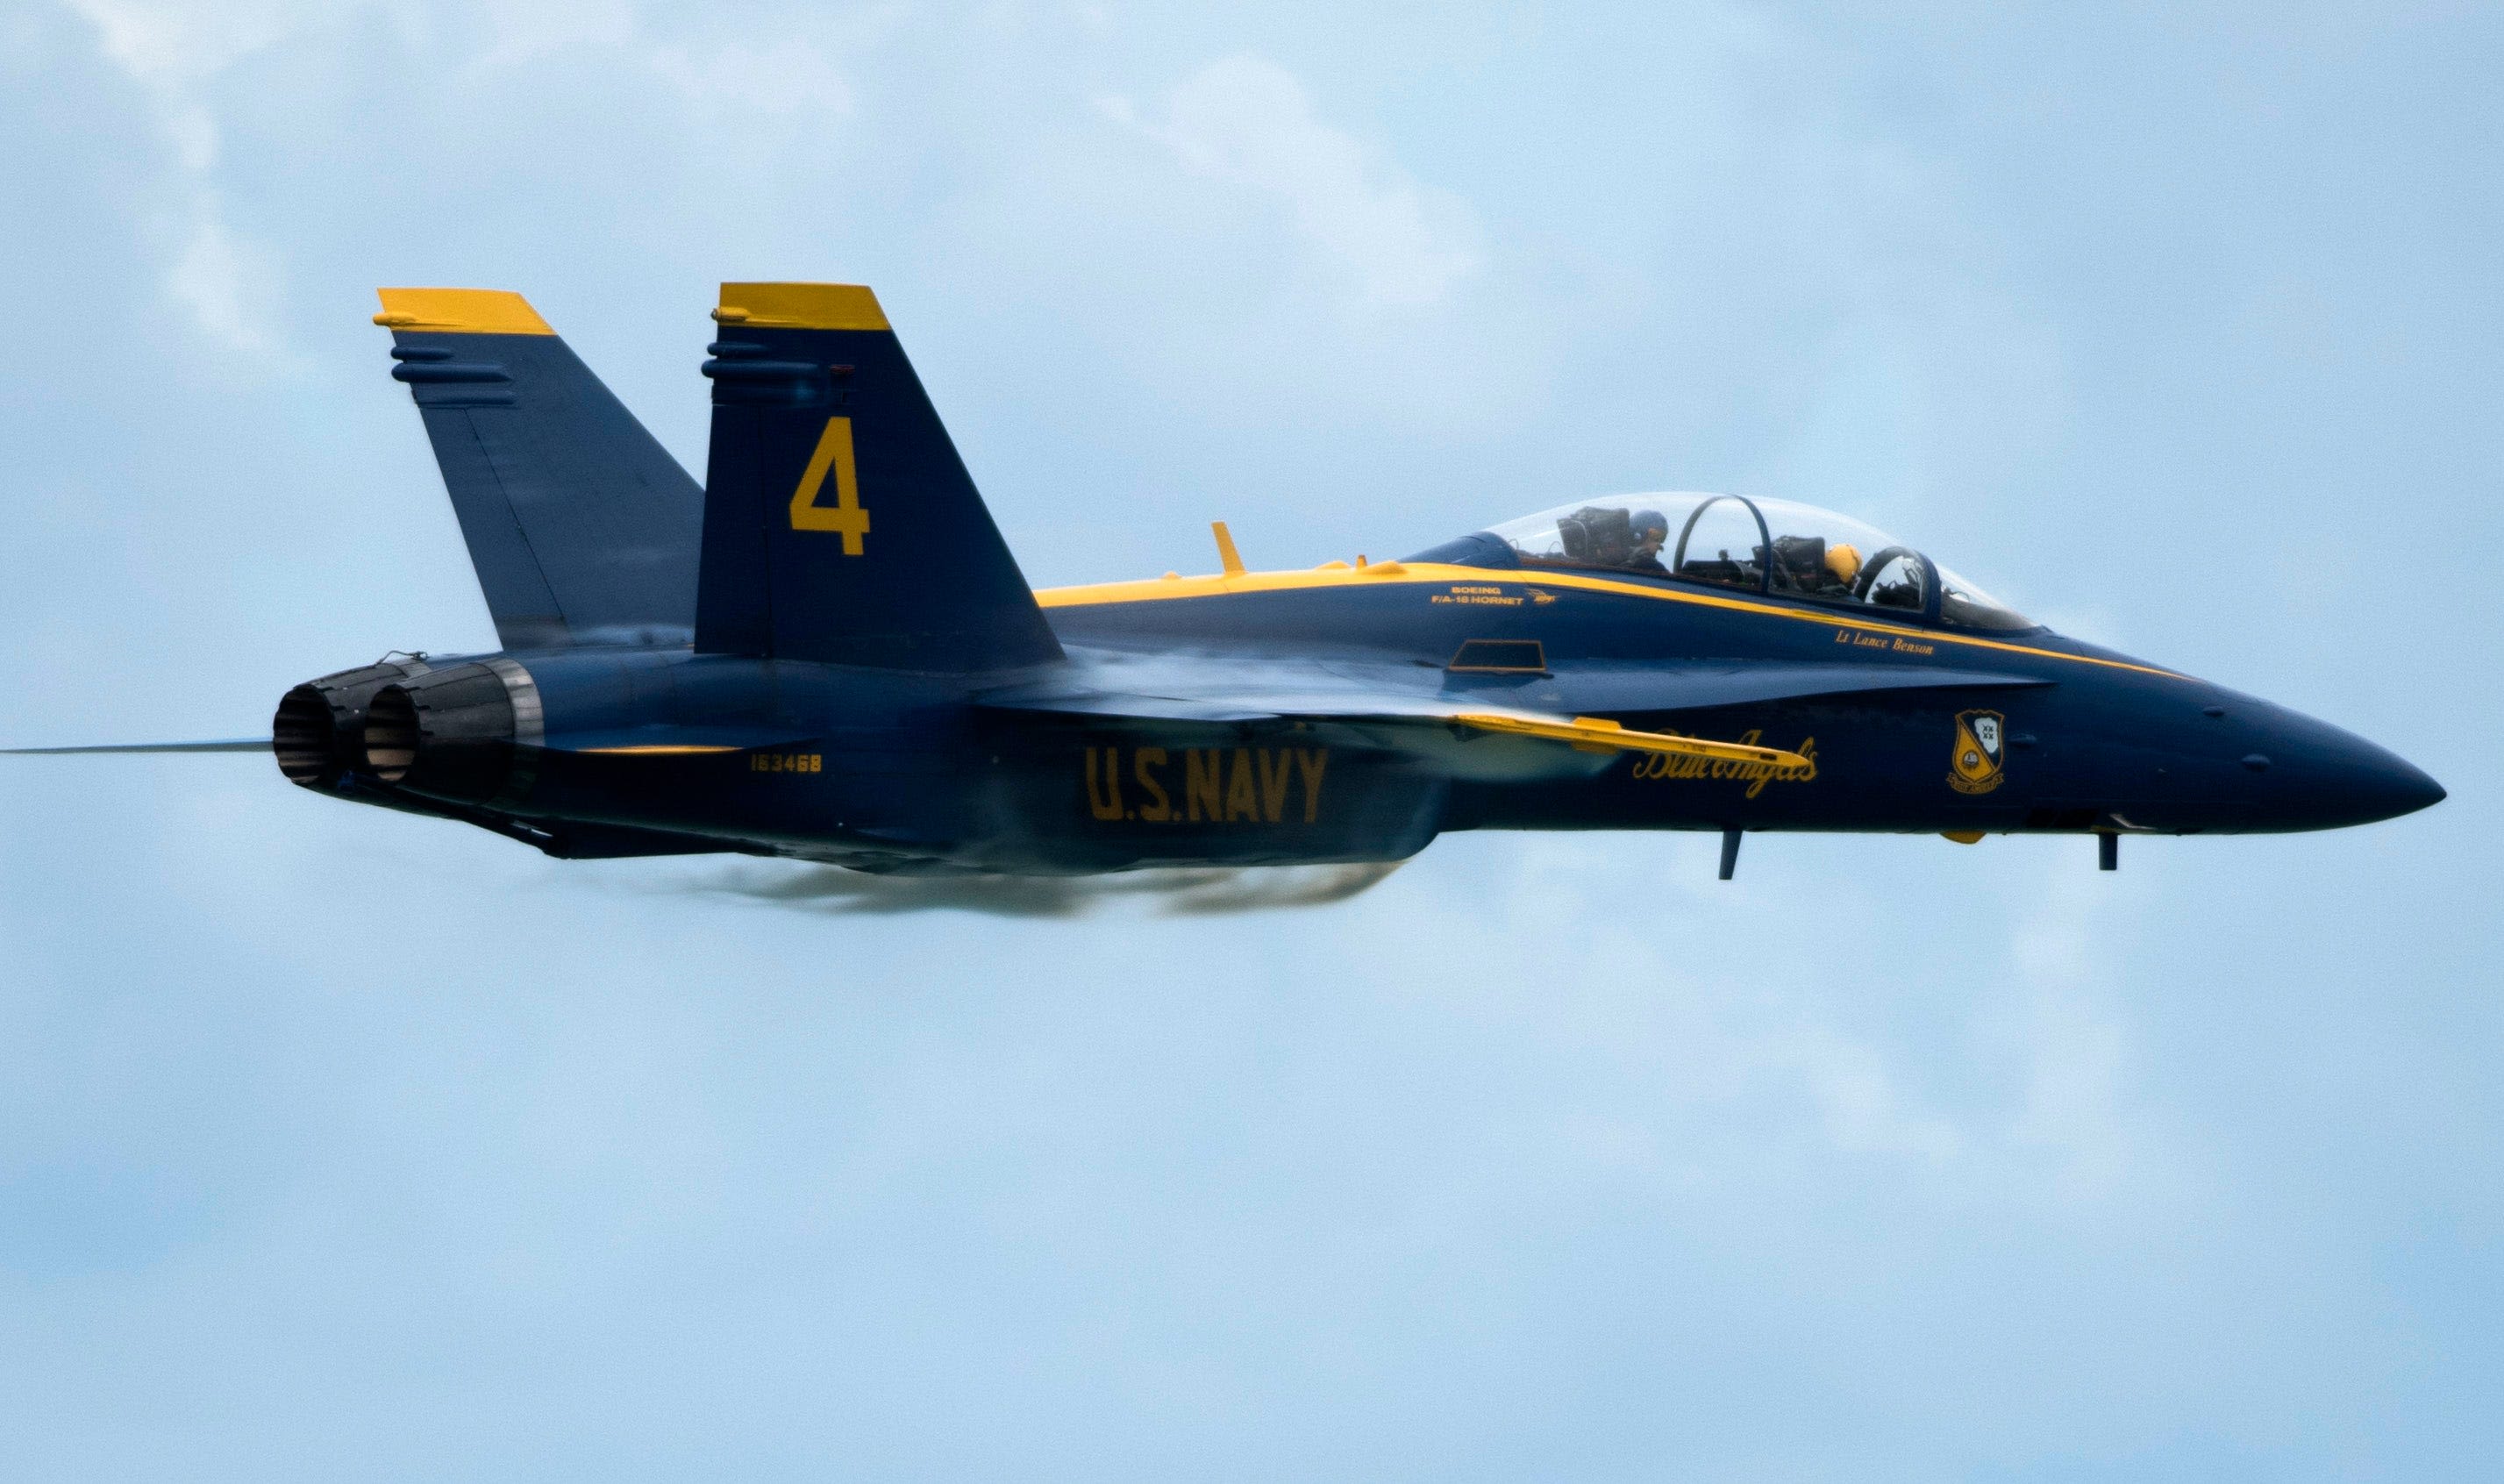 The Blue Angels' 'Sneak Pass' maneuver may be a fan favorite, but here's 9 more to know